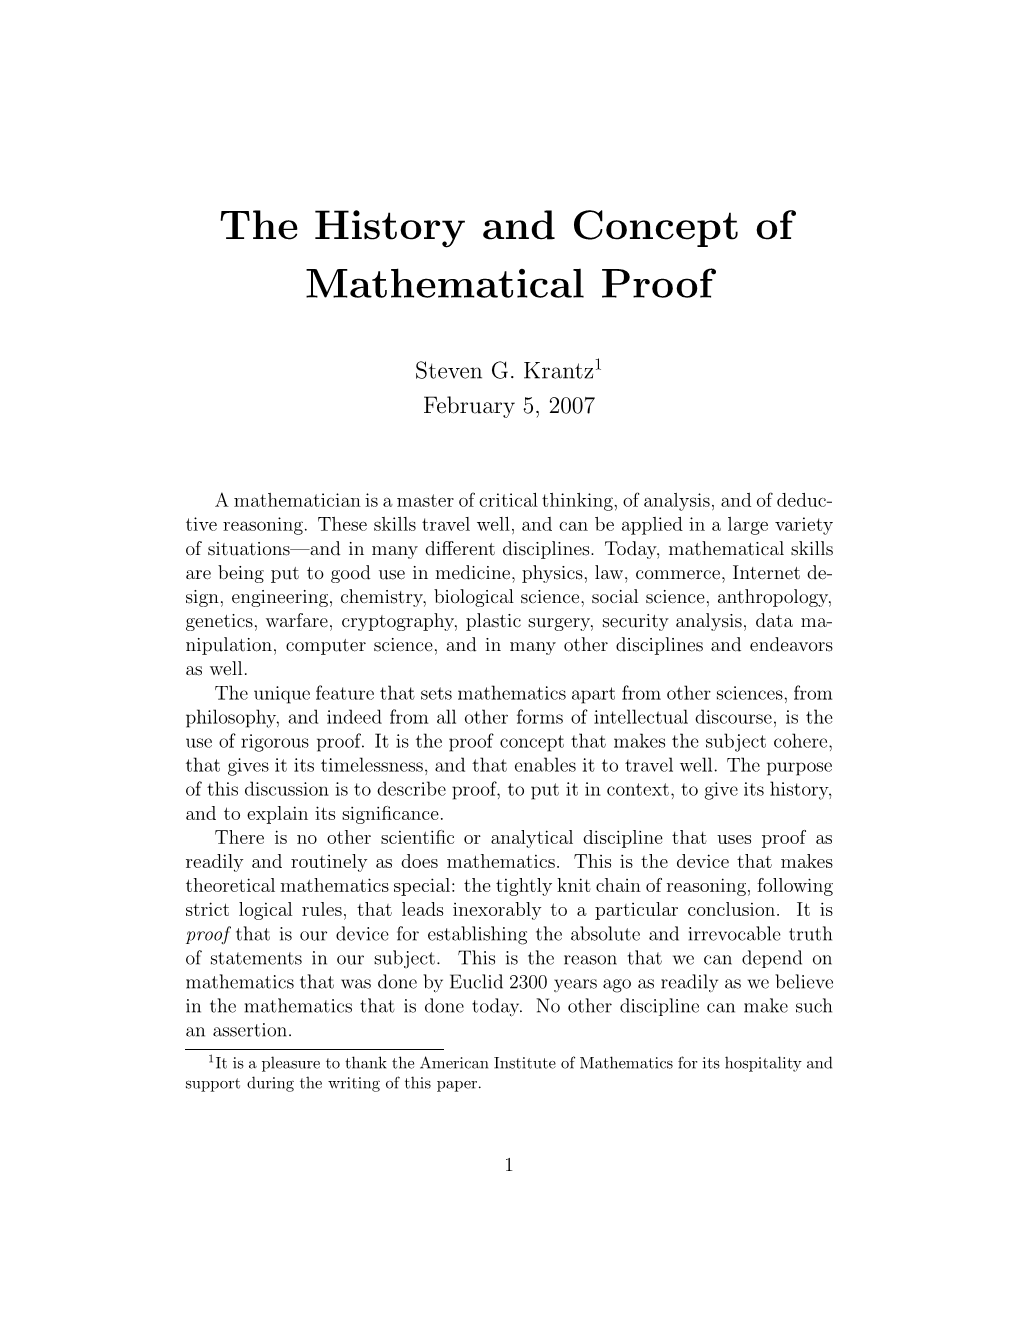 The History and Concept of Mathematical Proof